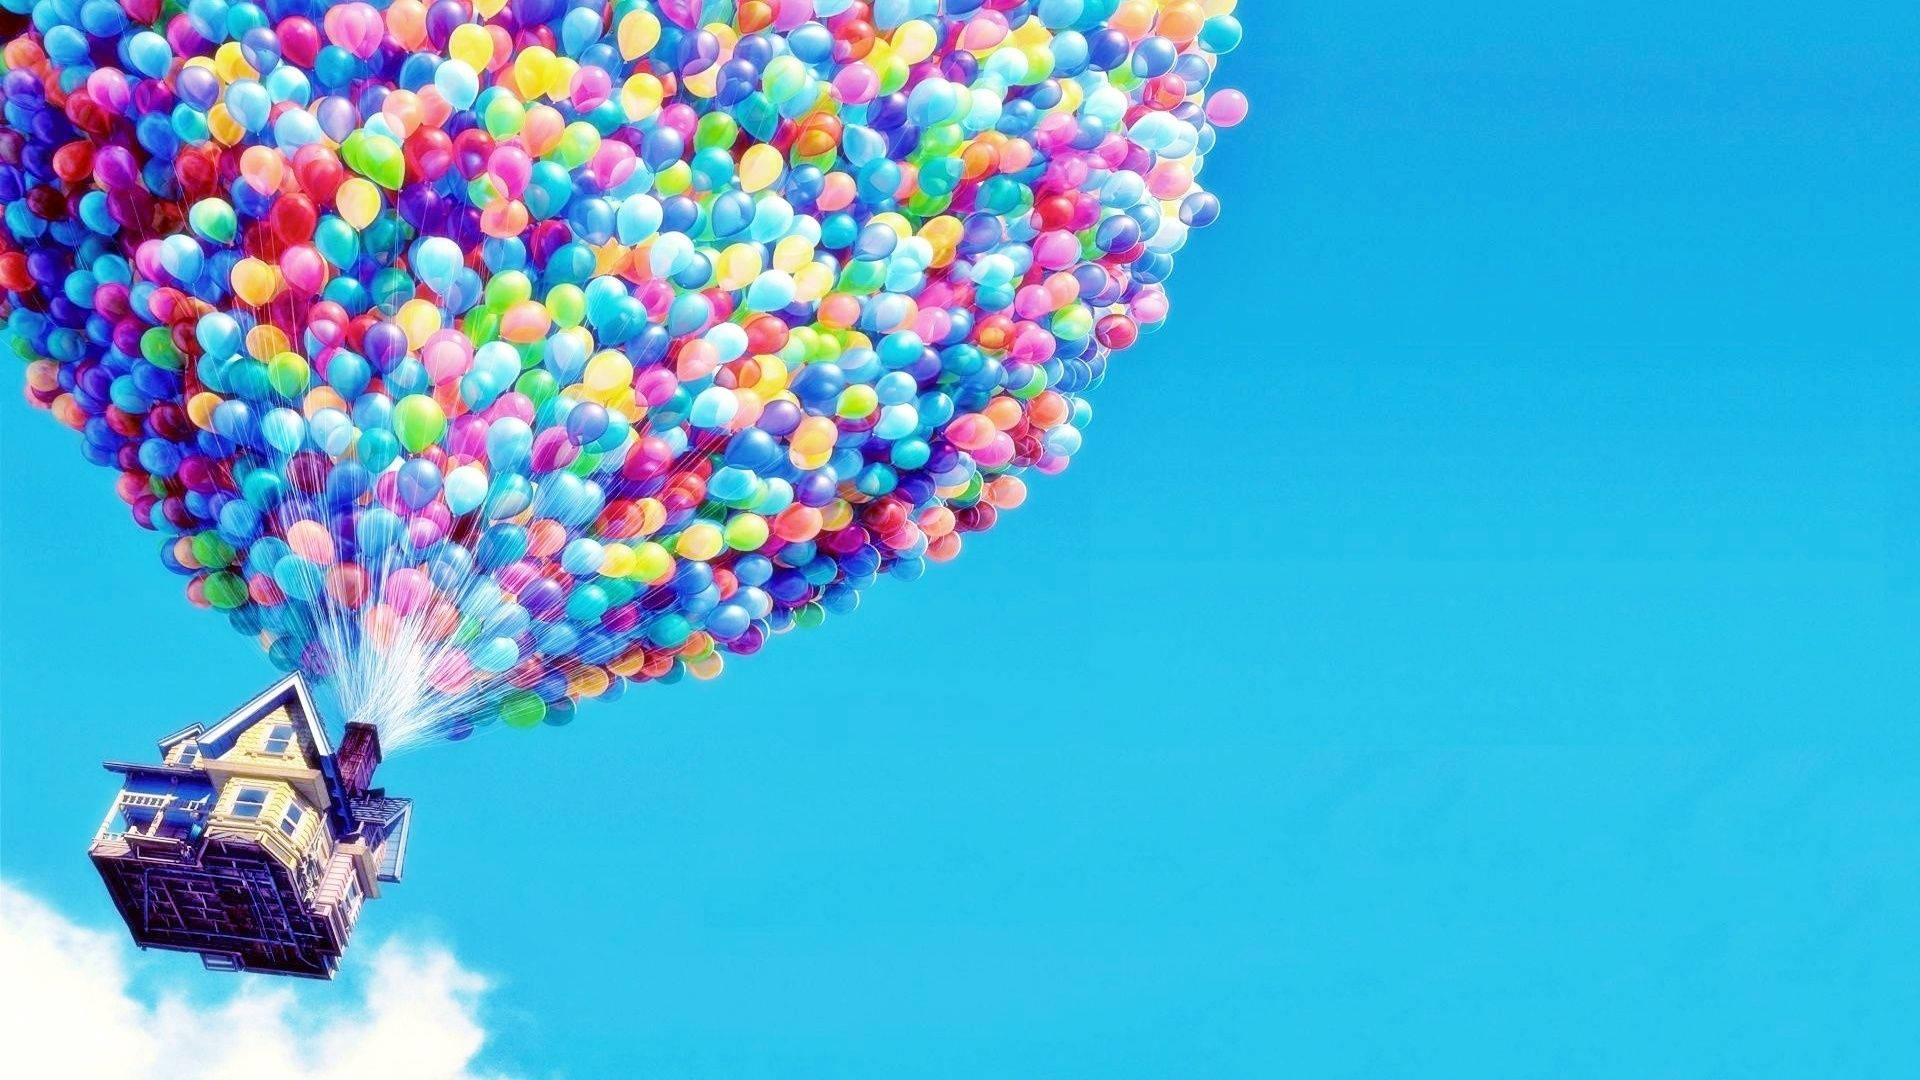 Up Movie Digital Cover Background